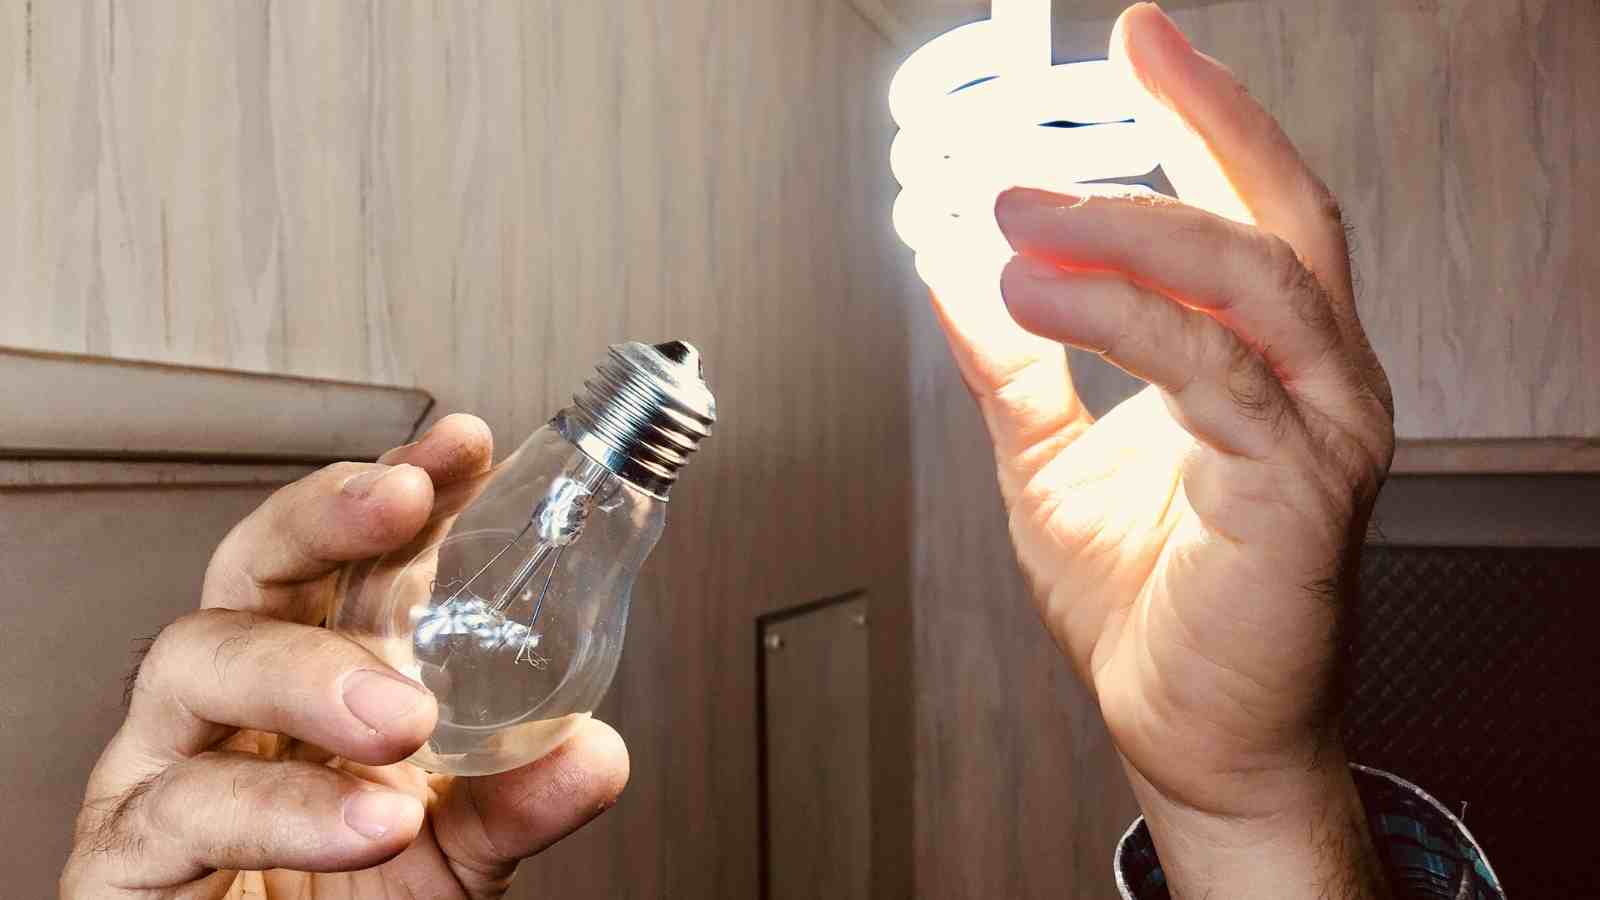 Technologies To Save Energy At Home